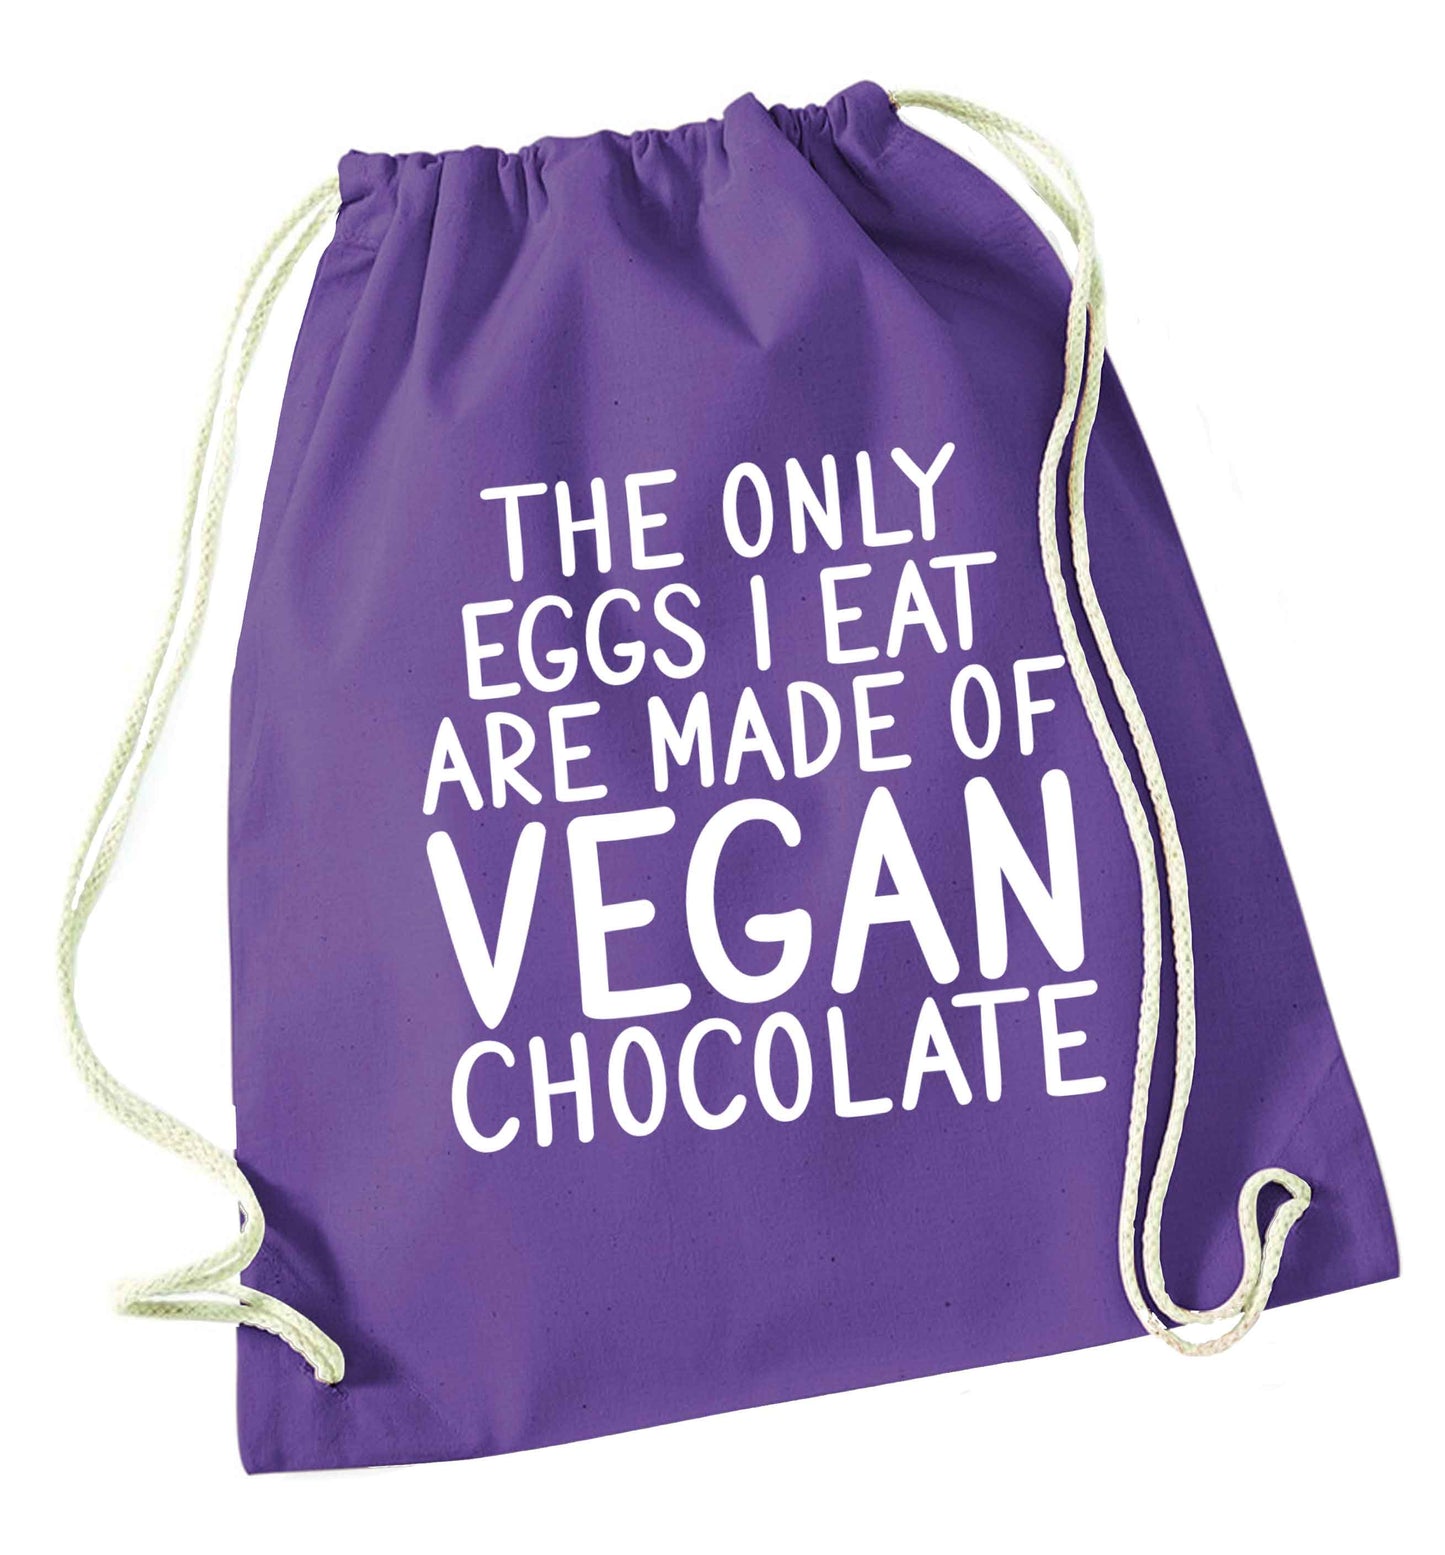 The only eggs I eat are made of vegan chocolate purple drawstring bag